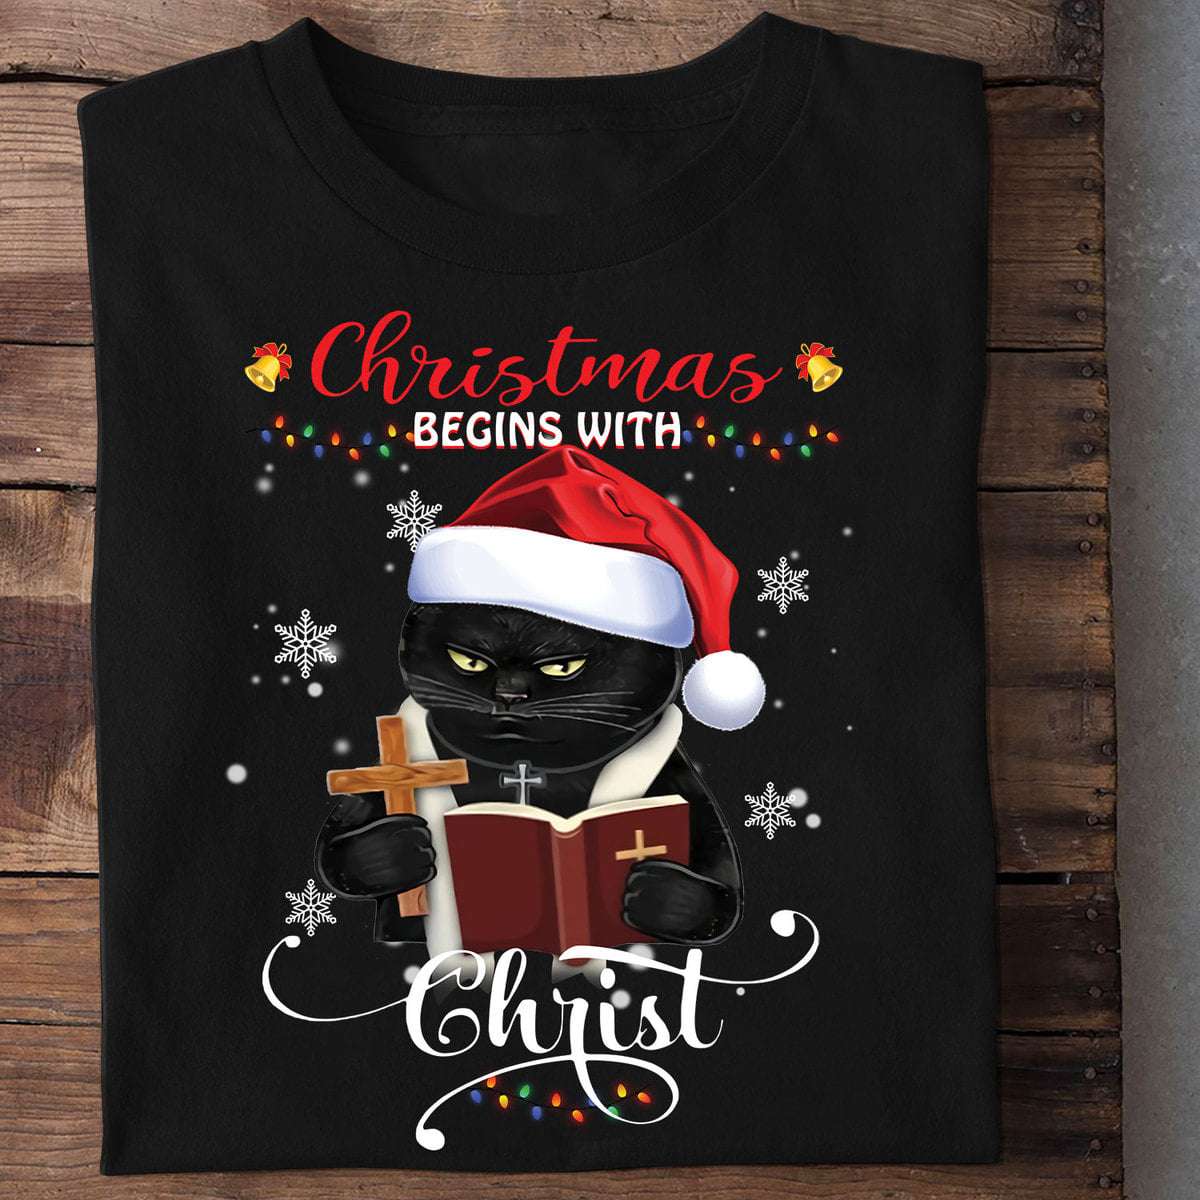 Chritmas Day Gift, Black Cat Pastor And Bible - Christmas begins with christ